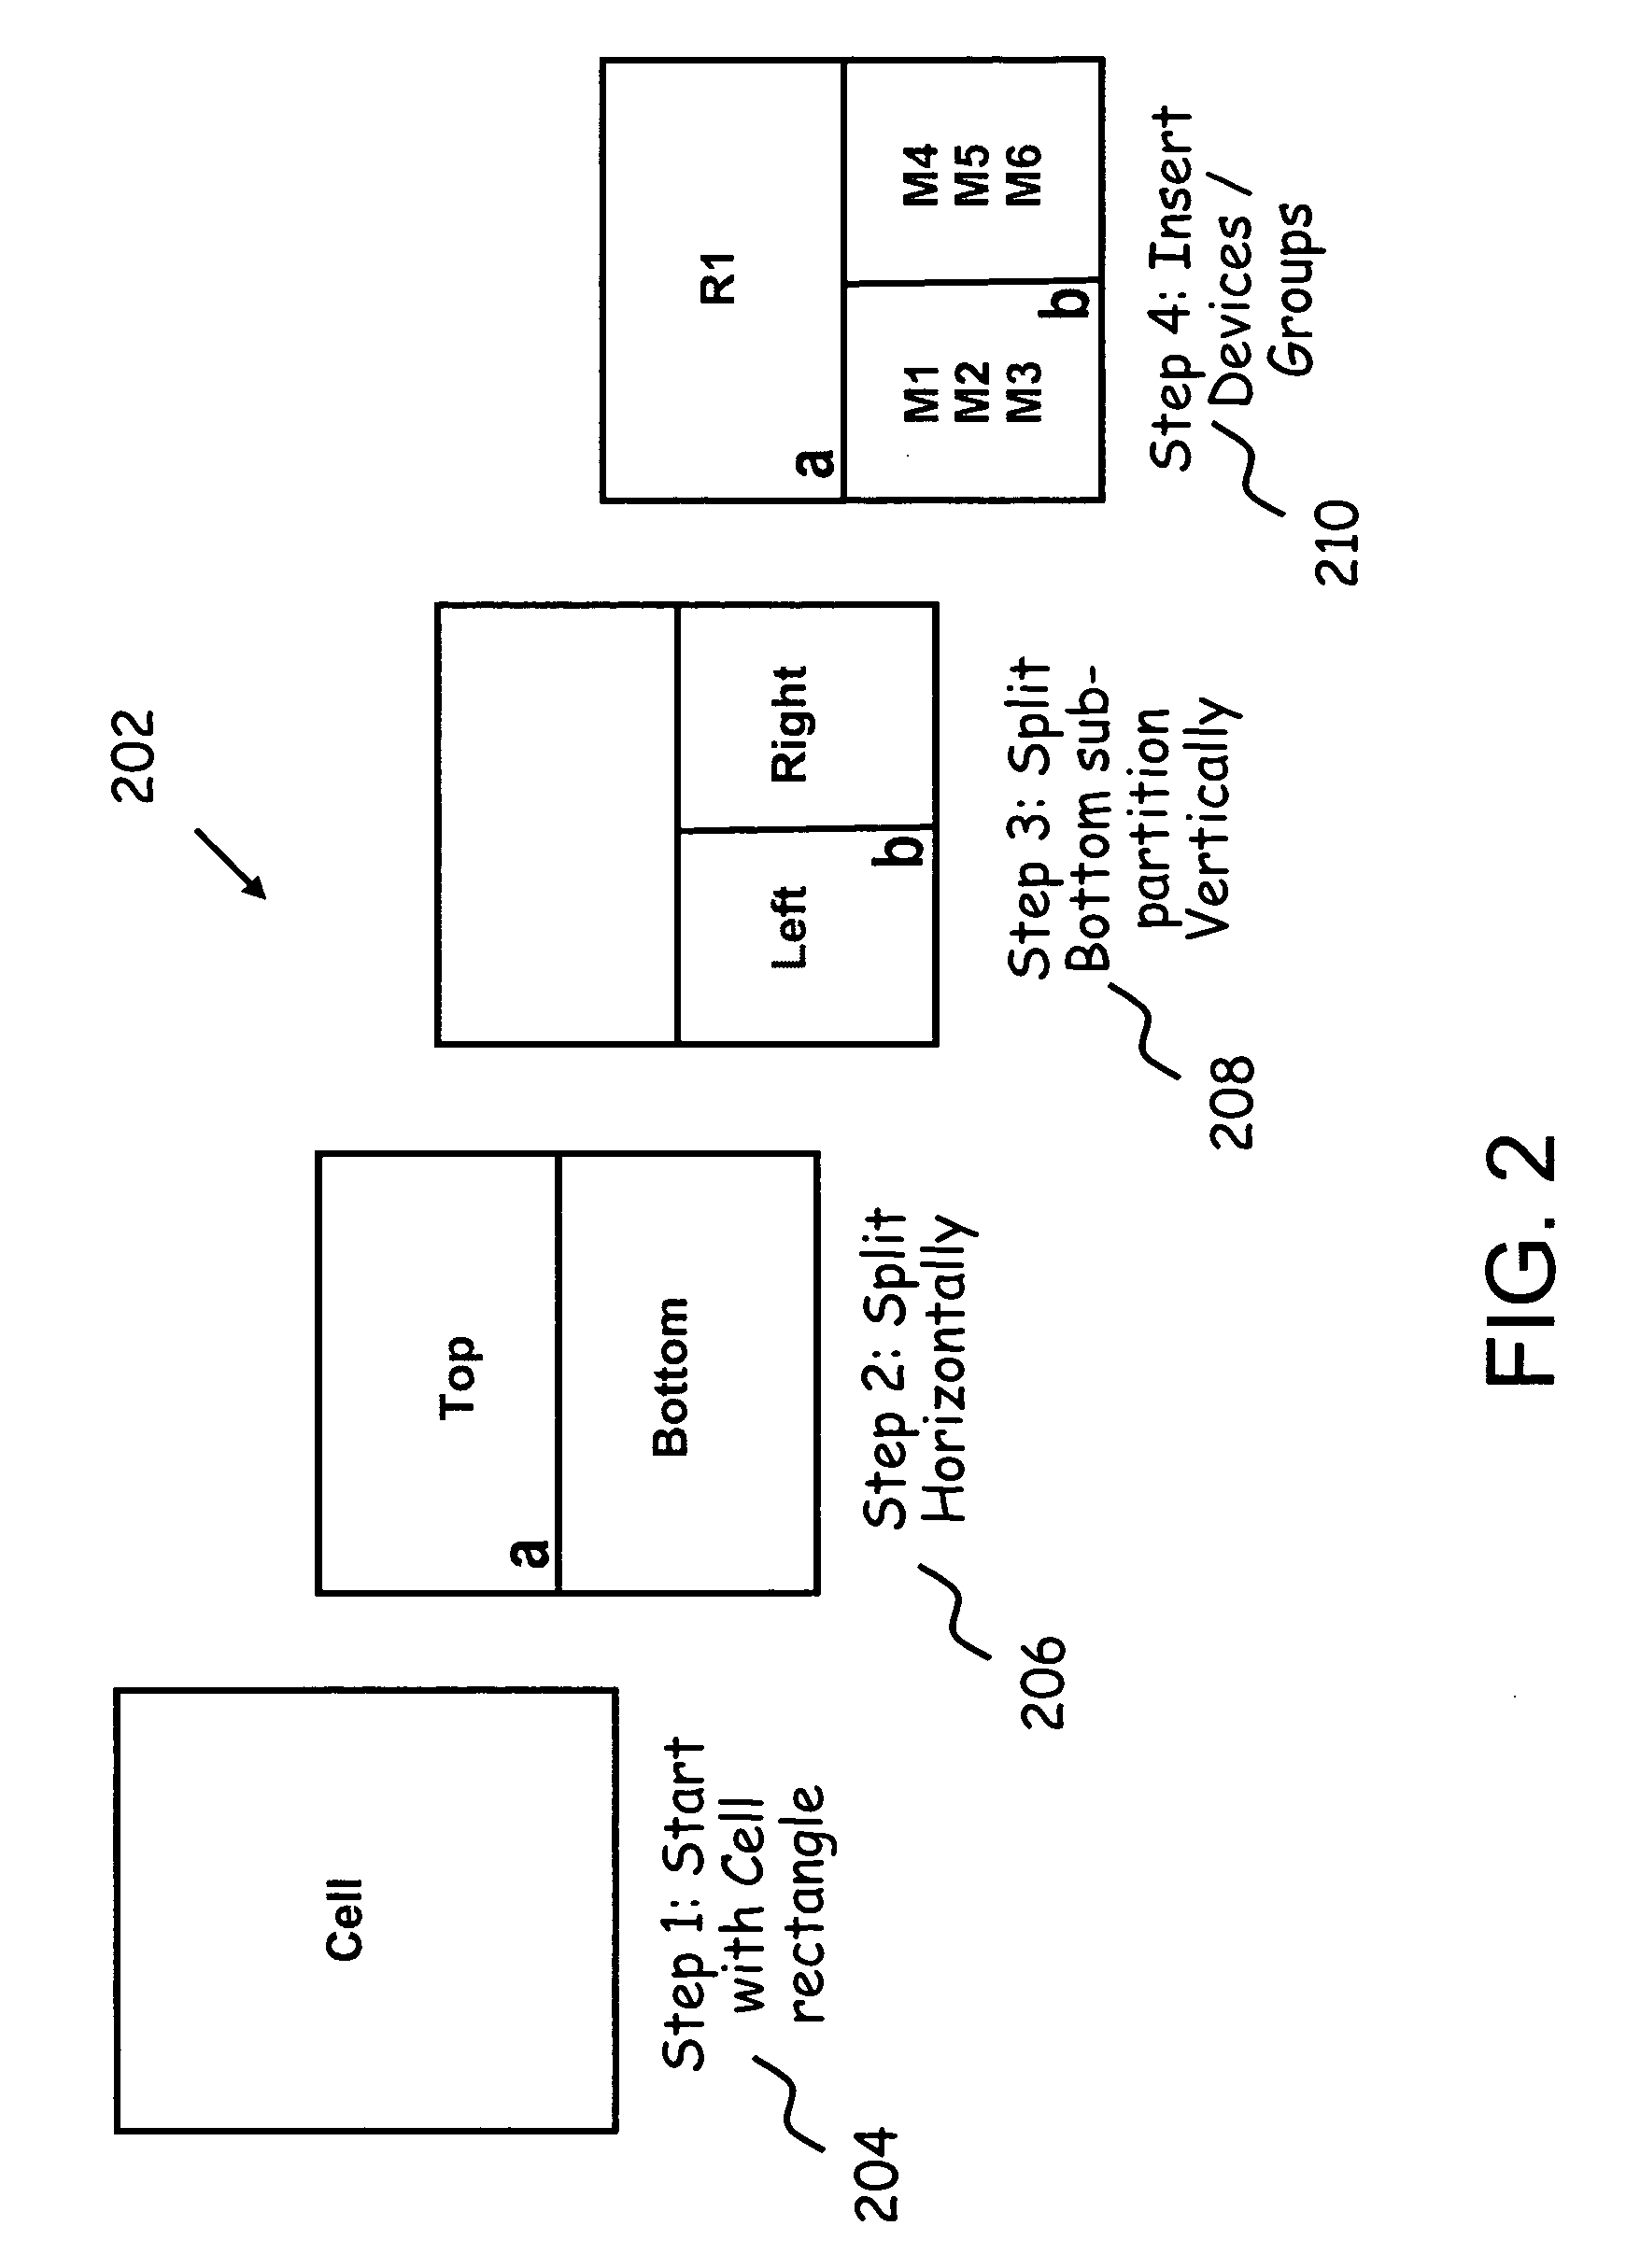 Optimizing circuit layouts by configuring rooms for placing devices